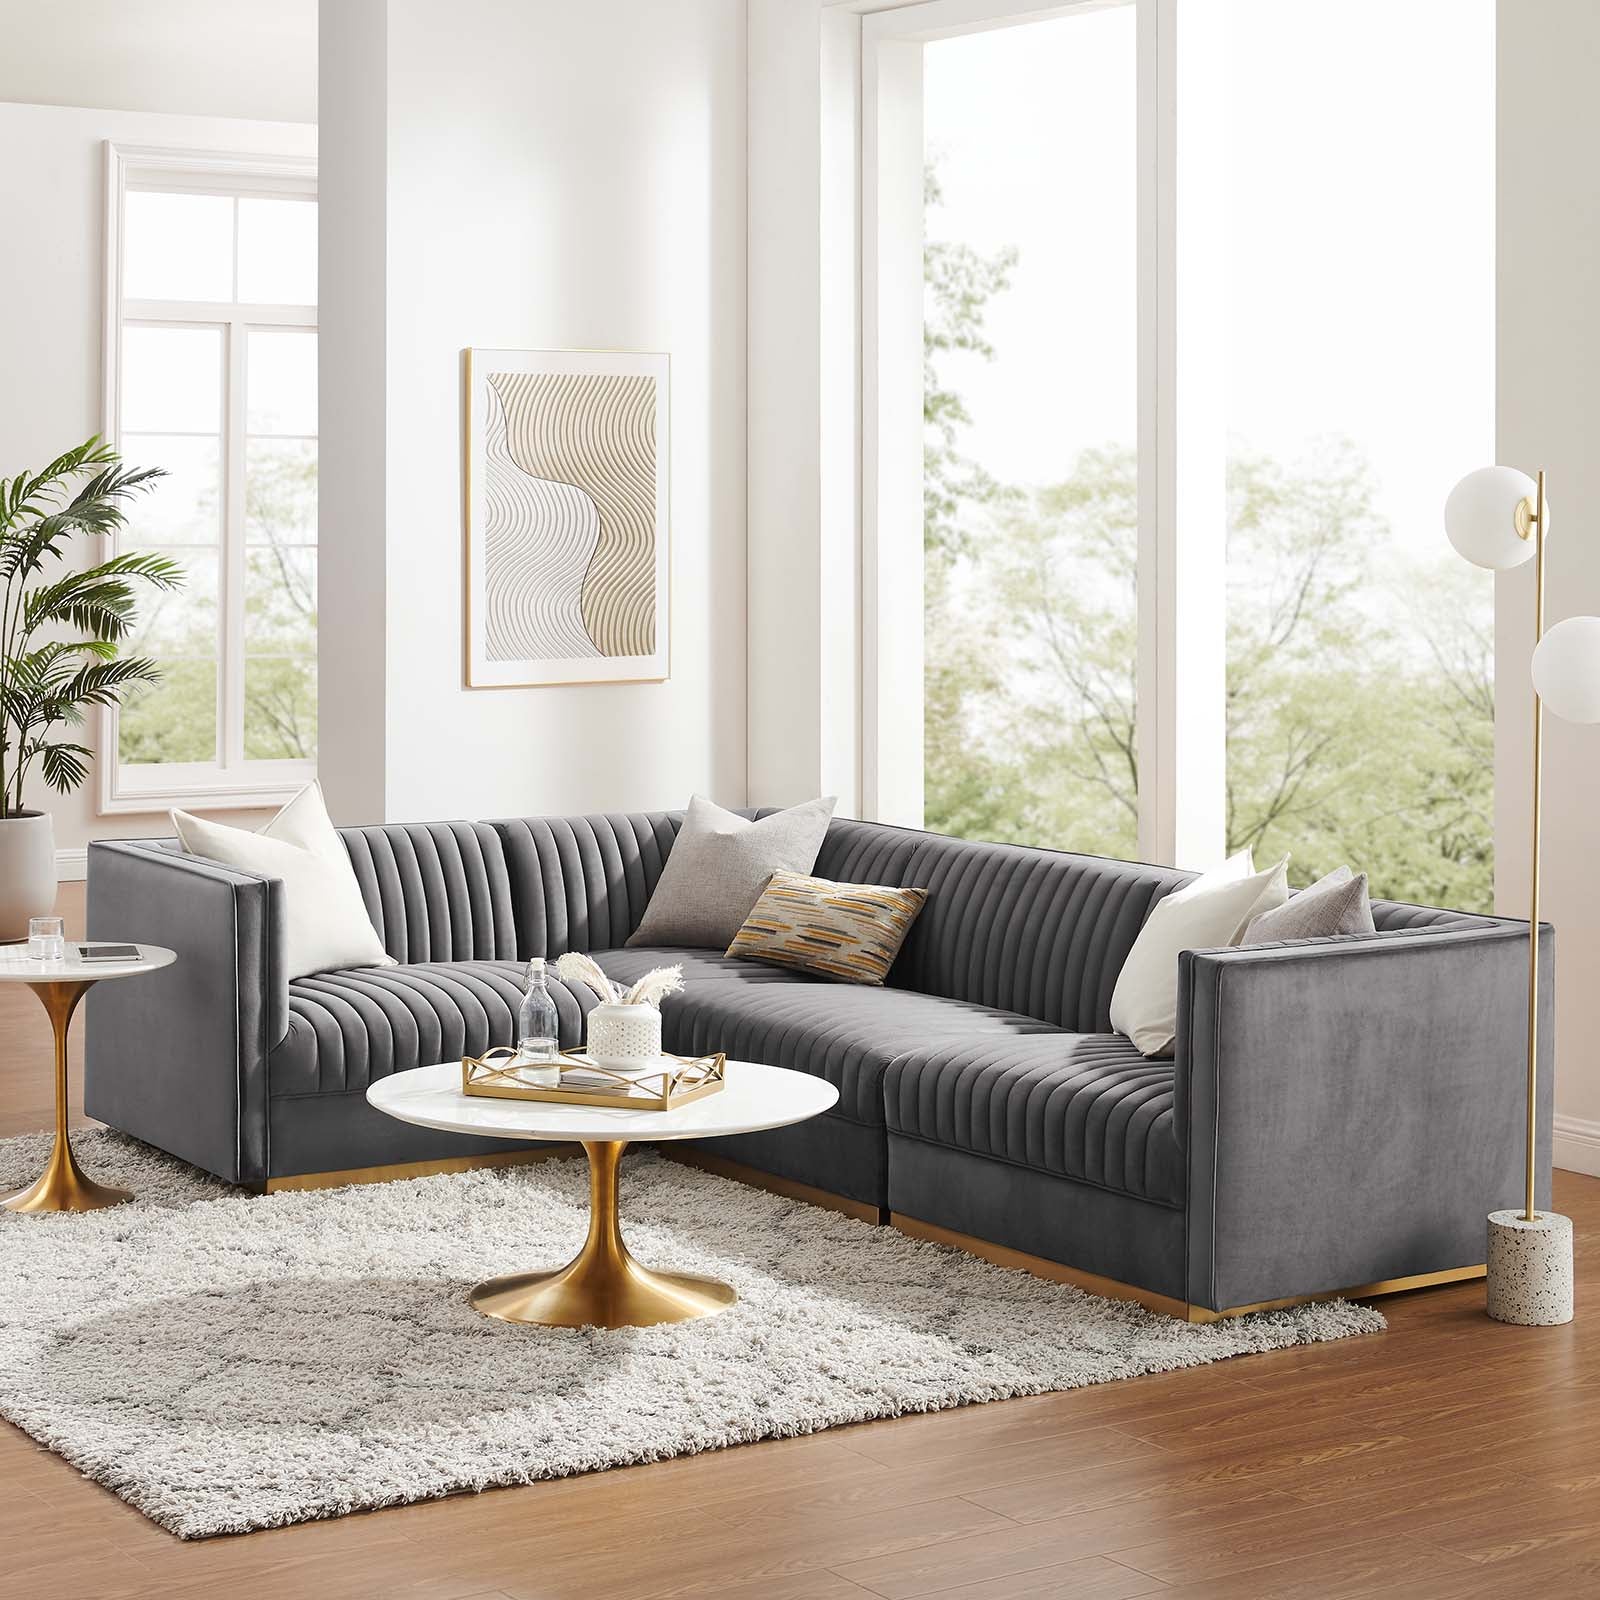 Modway Sectional Sofas - Sanguine Channel Tufted Performance Velvet 4 Piece Left-Facing Modular Sectional Sofa Gray